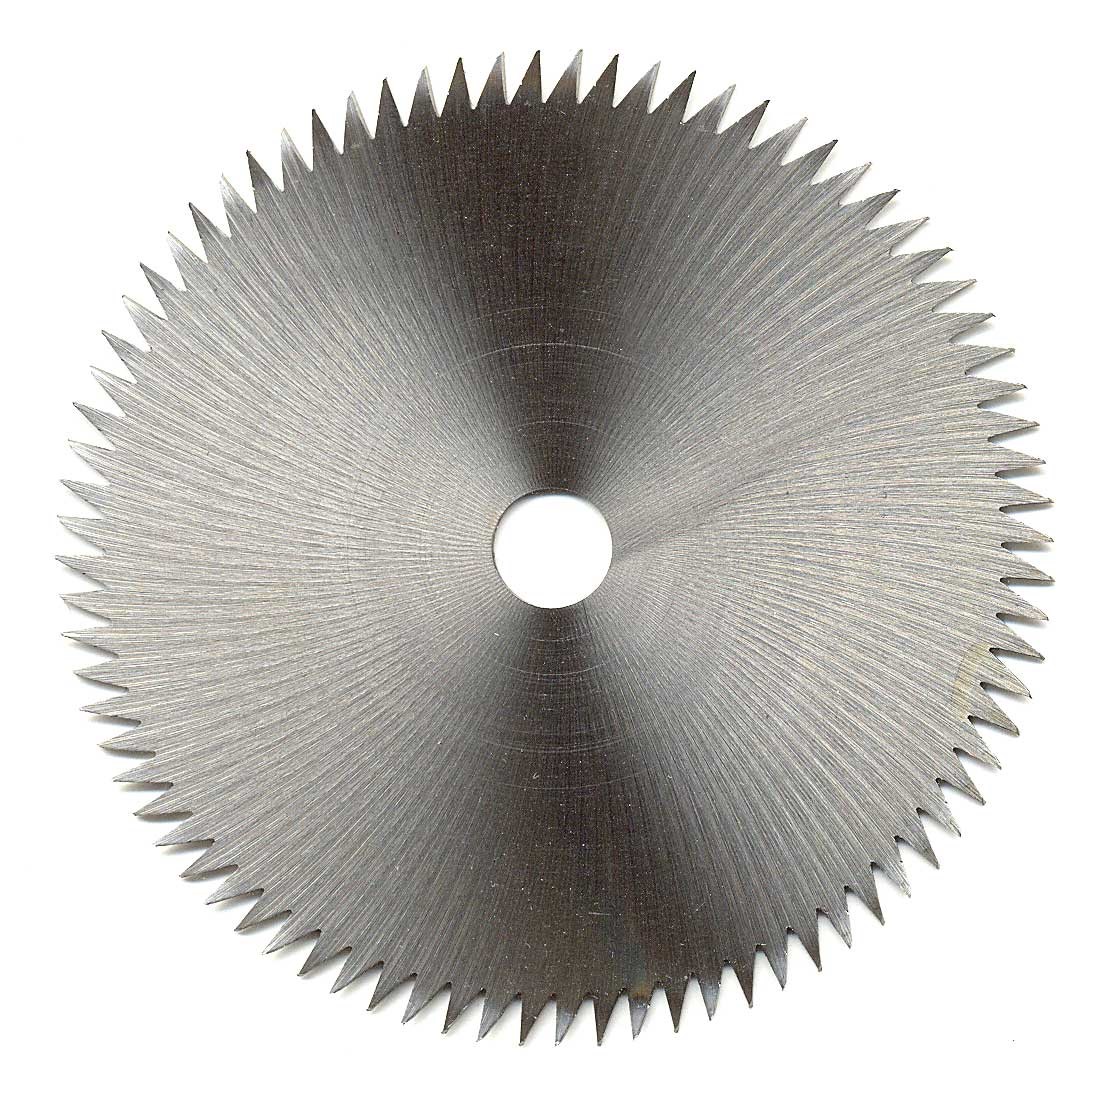 80 Tooth Saw Blade